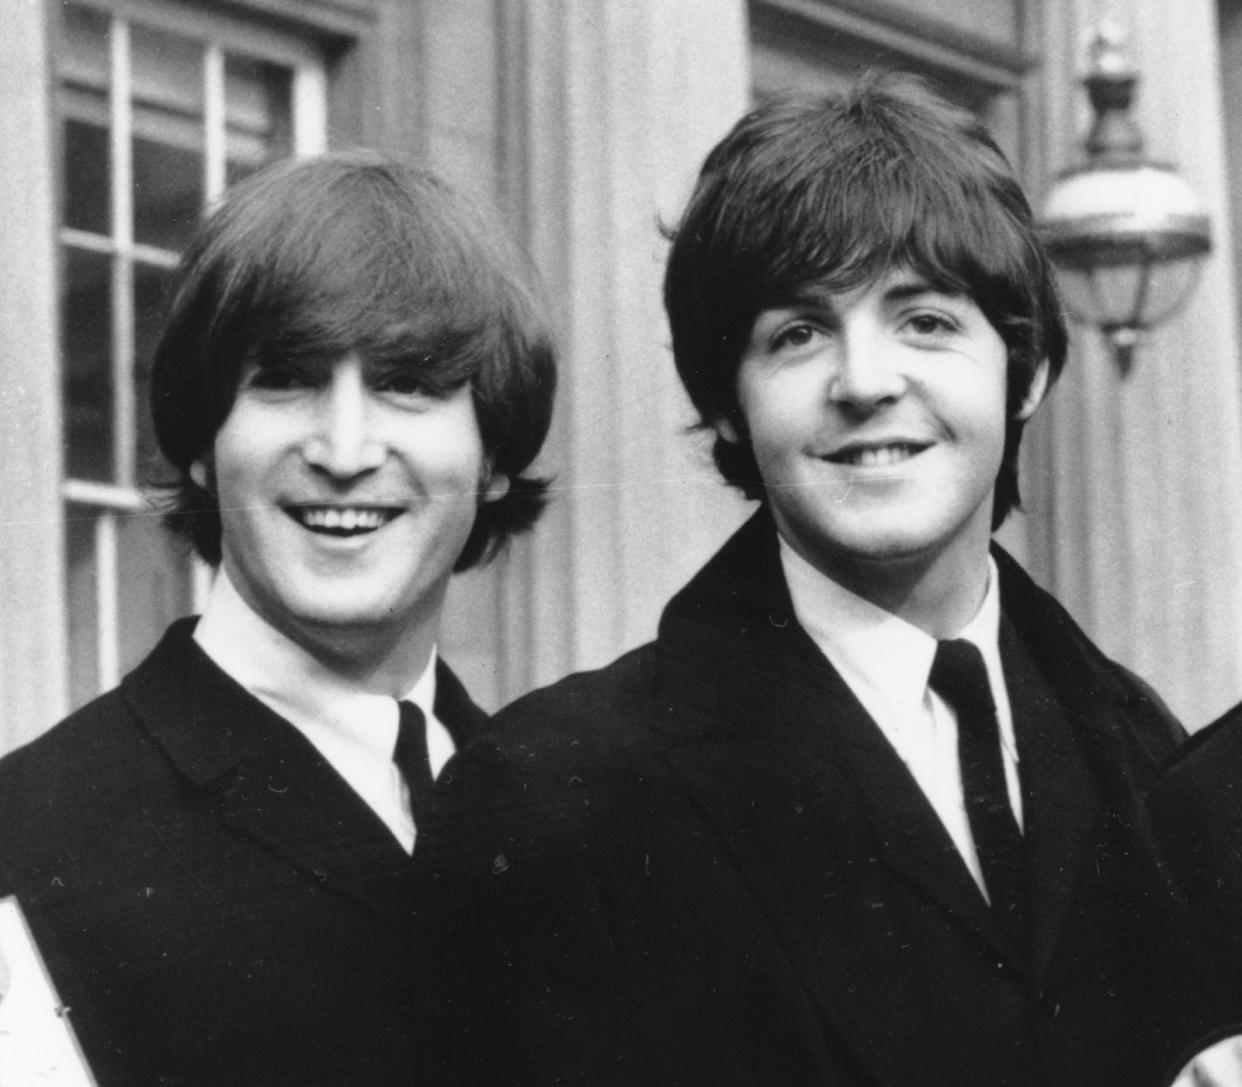 **FILE**   Beatles This Oct. 26, 1965 file photo shows John Lennon, left, and Paul McCartney as they smile during a ceremony at Buckingham Palace in London. The British Broadcasting Corp. will air a long lost Beatles interview featuring John Lennon and Paul McCartney talking about the day they met and their songwriting partnership. The precious film sat forgotten for 44 years in a garage in south London until film fan Richard Jeffs realized a piece of pop history was contained inside.    (AP Photo, FILE)